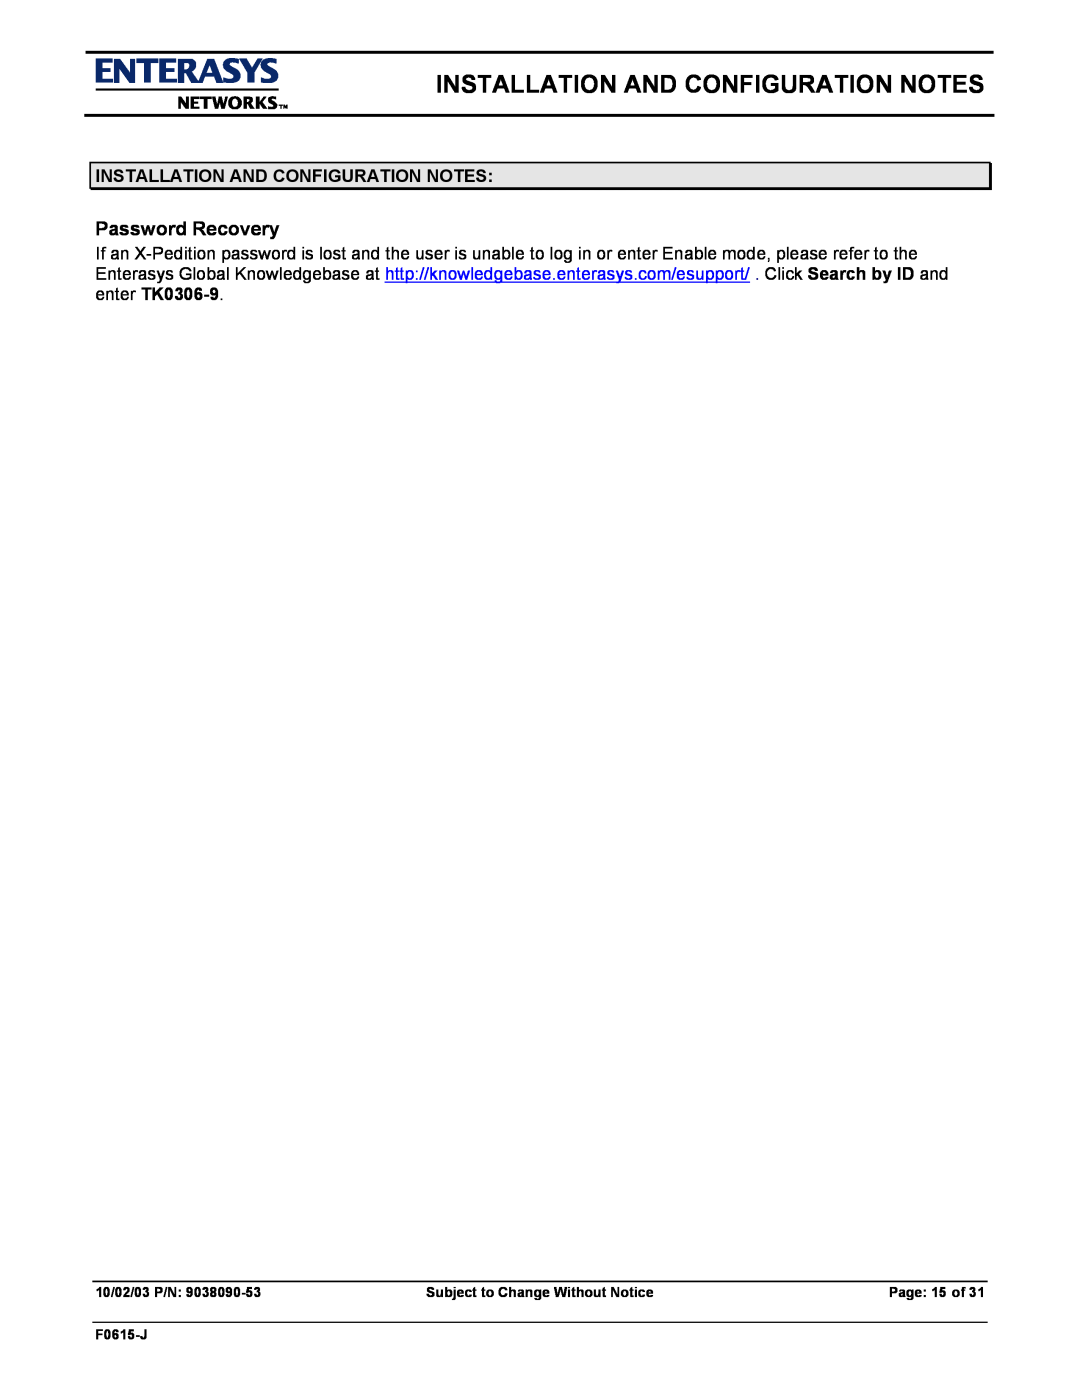 Enterasys Networks E9.1.7.0 manual Installation And Configuration Notes, Password Recovery, Page 15 of 